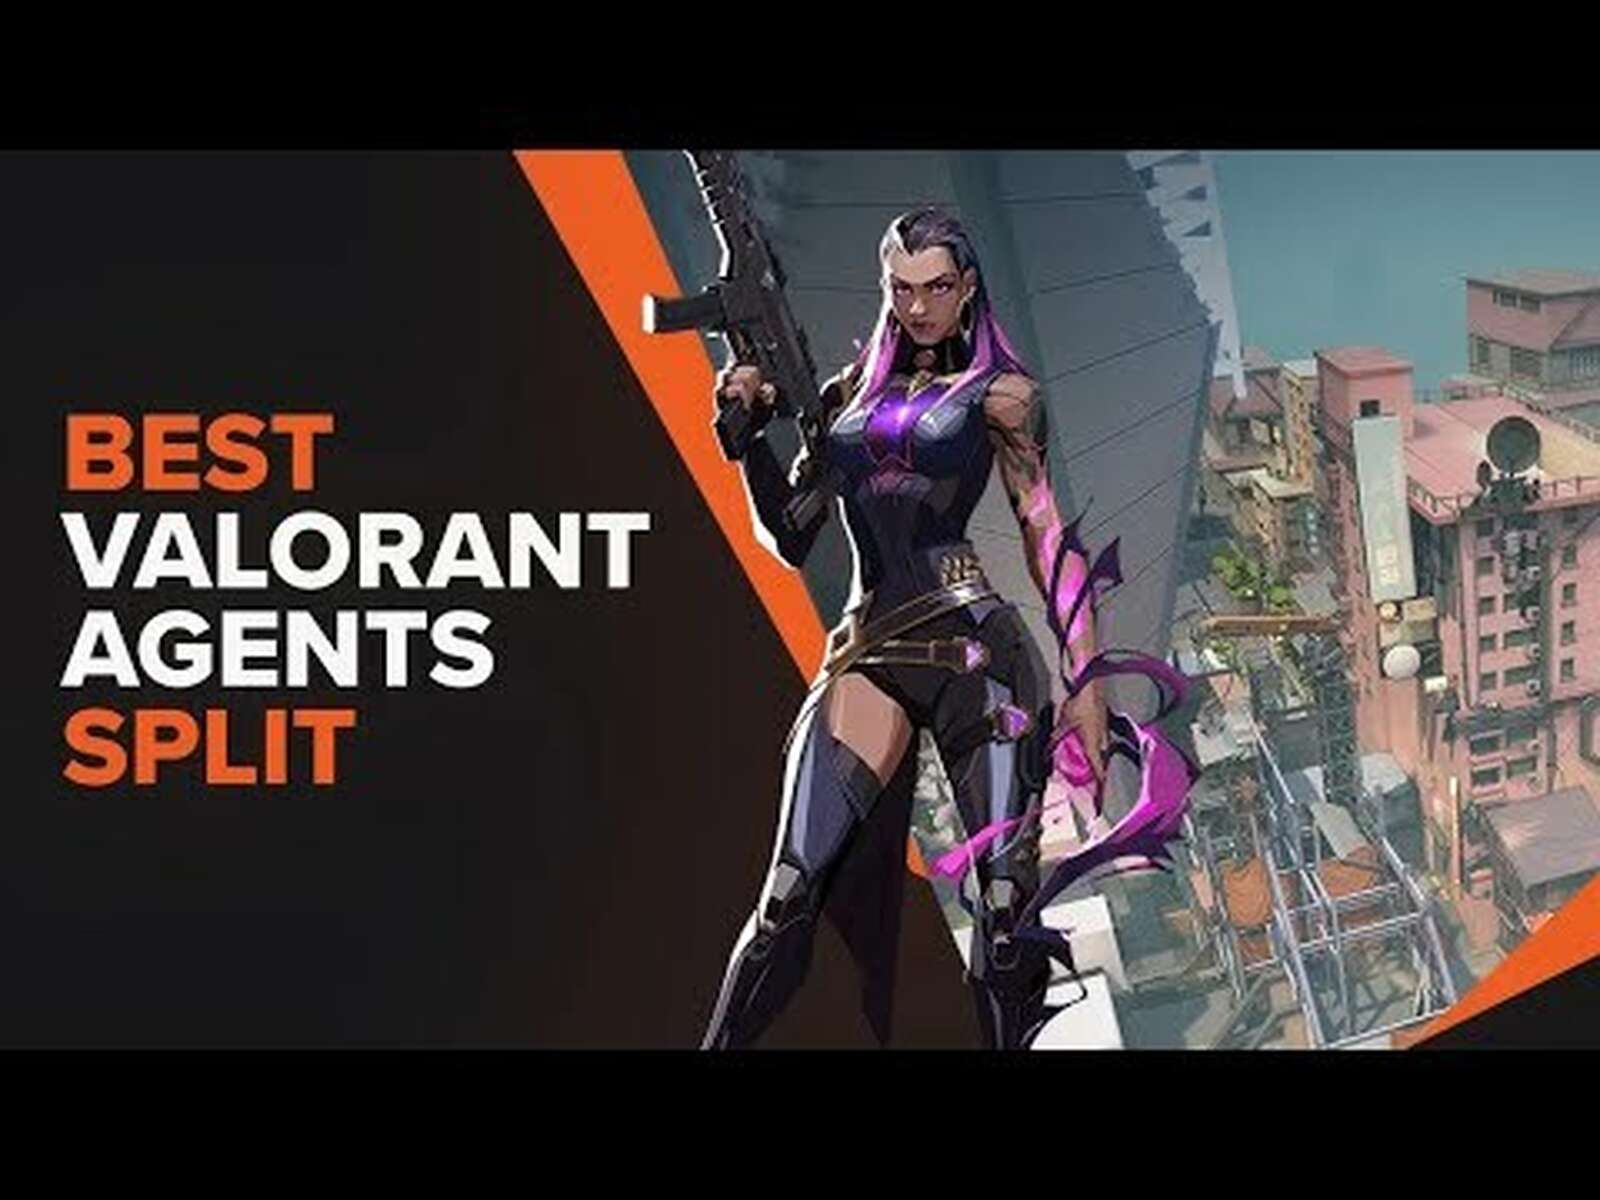 The 5 Best Valorant Agents To Play on Split